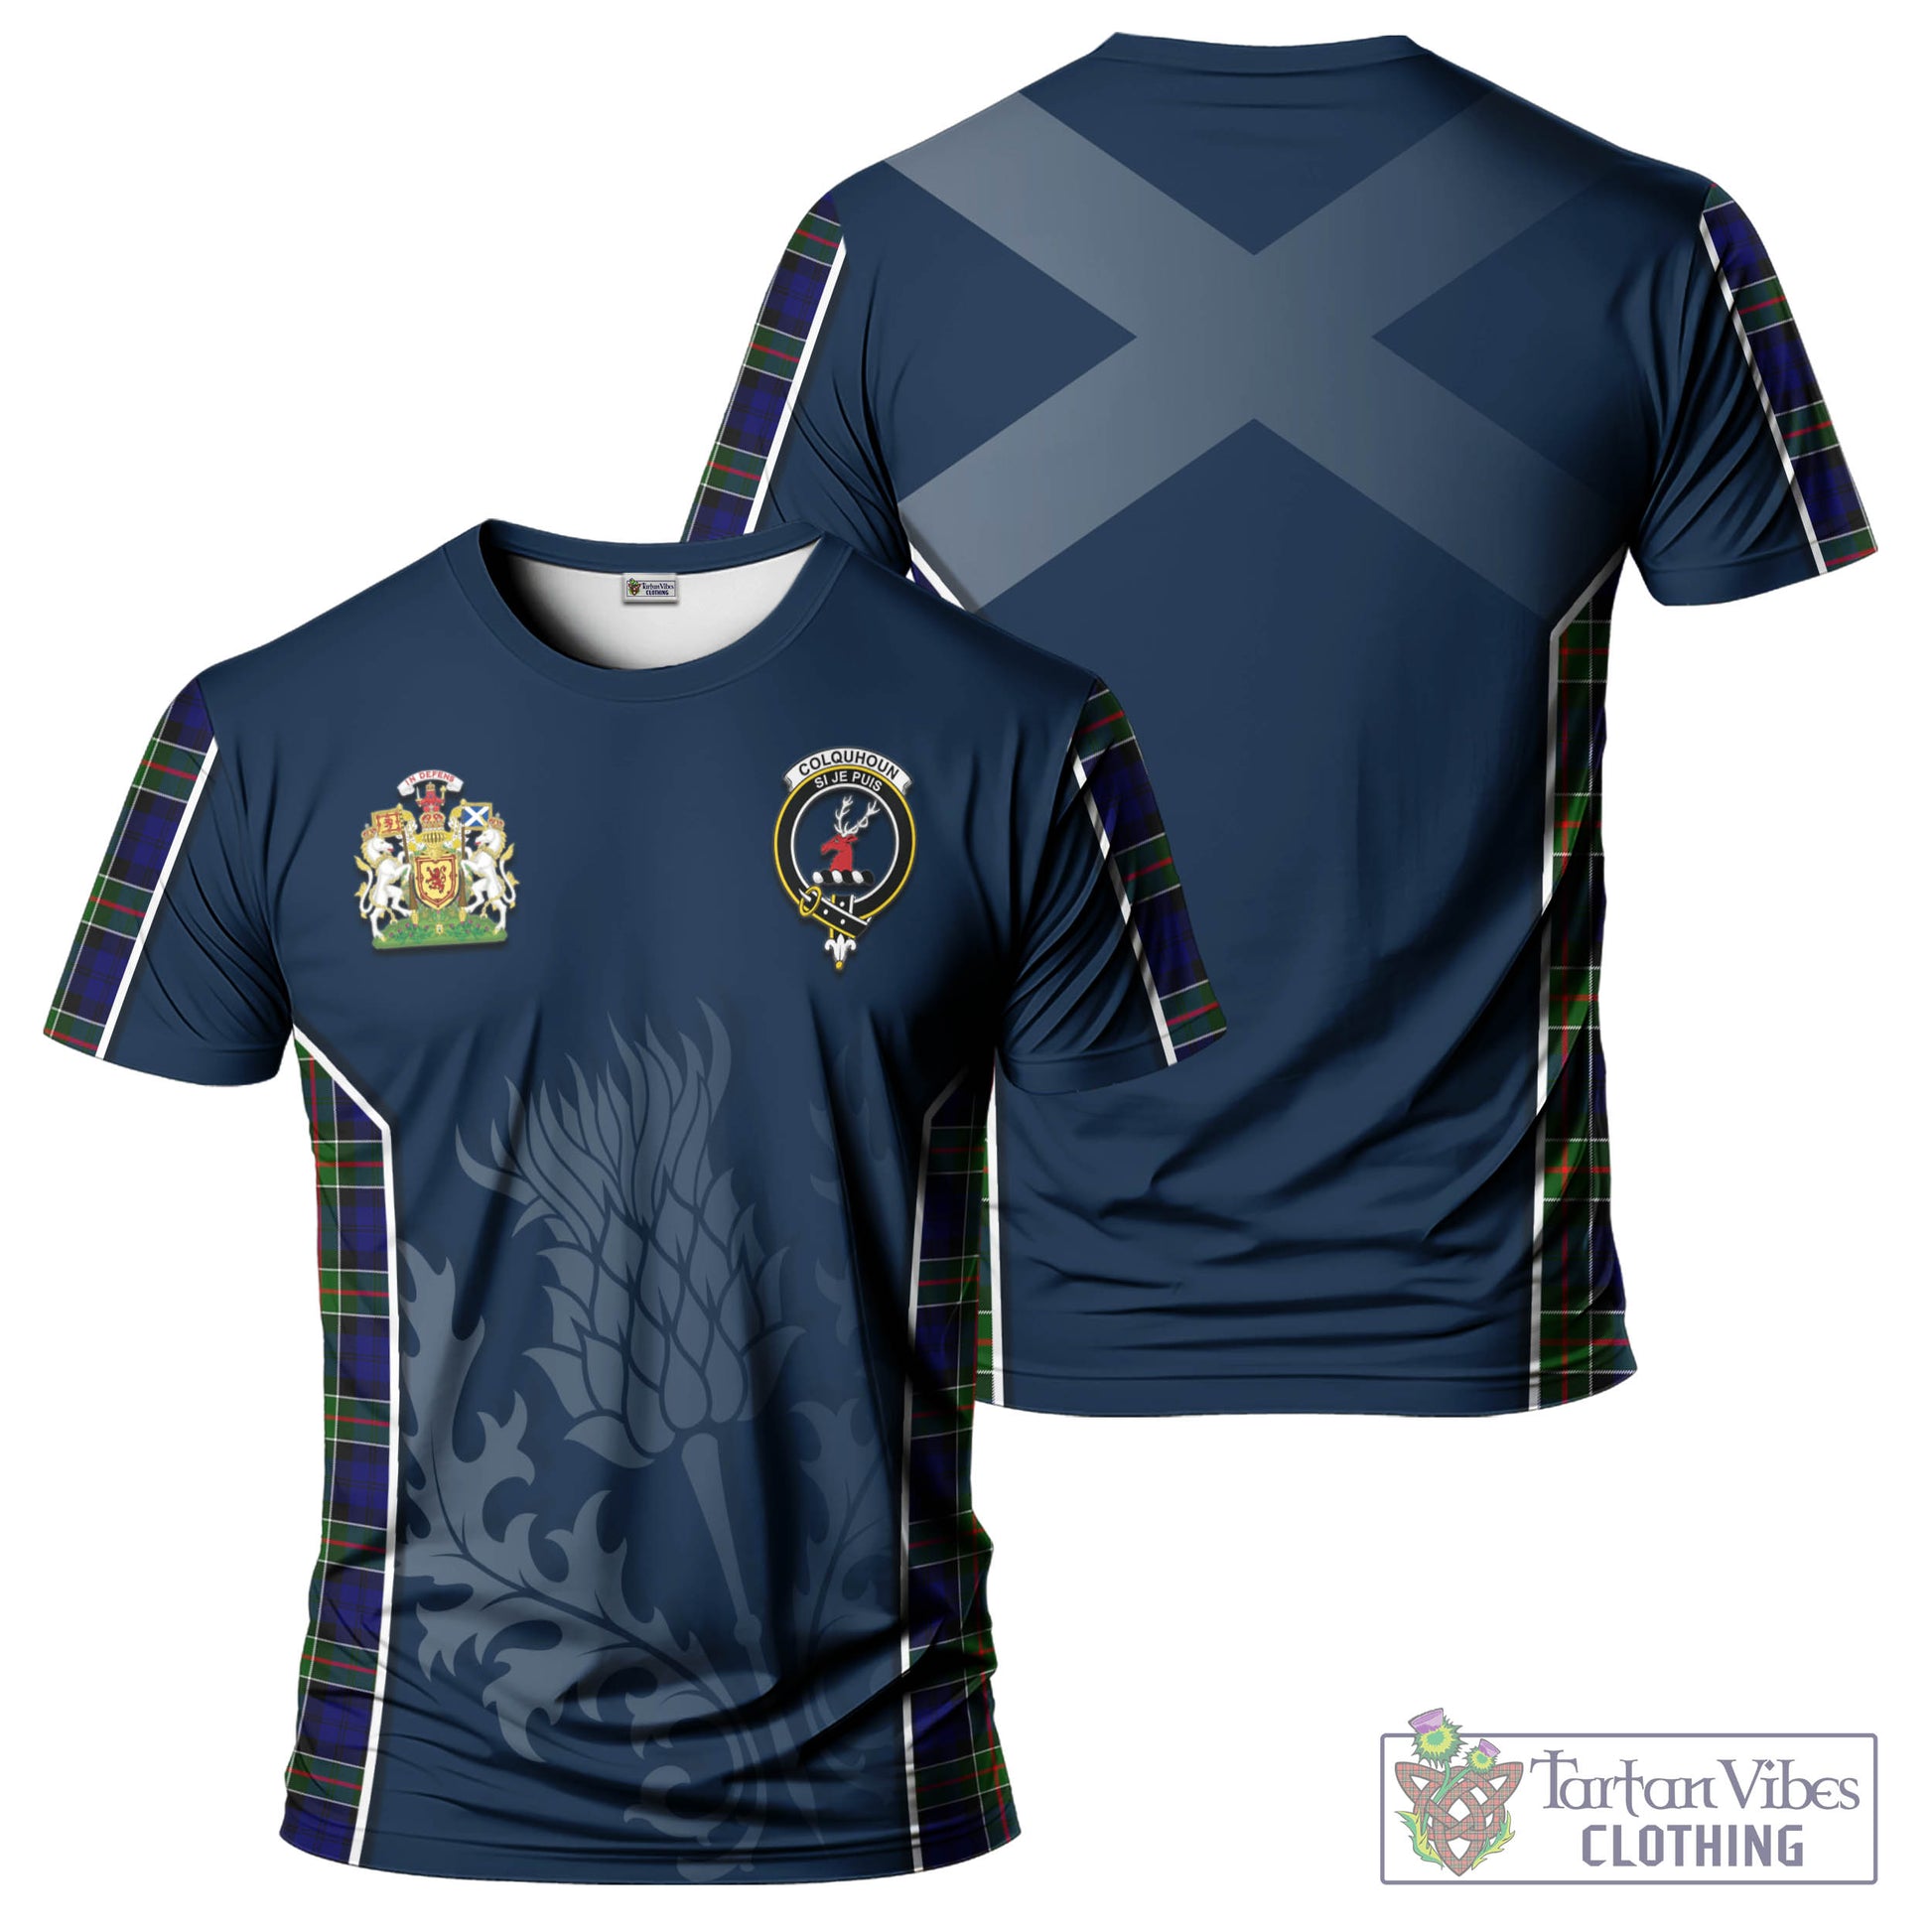 Tartan Vibes Clothing Colquhoun Modern Tartan T-Shirt with Family Crest and Scottish Thistle Vibes Sport Style